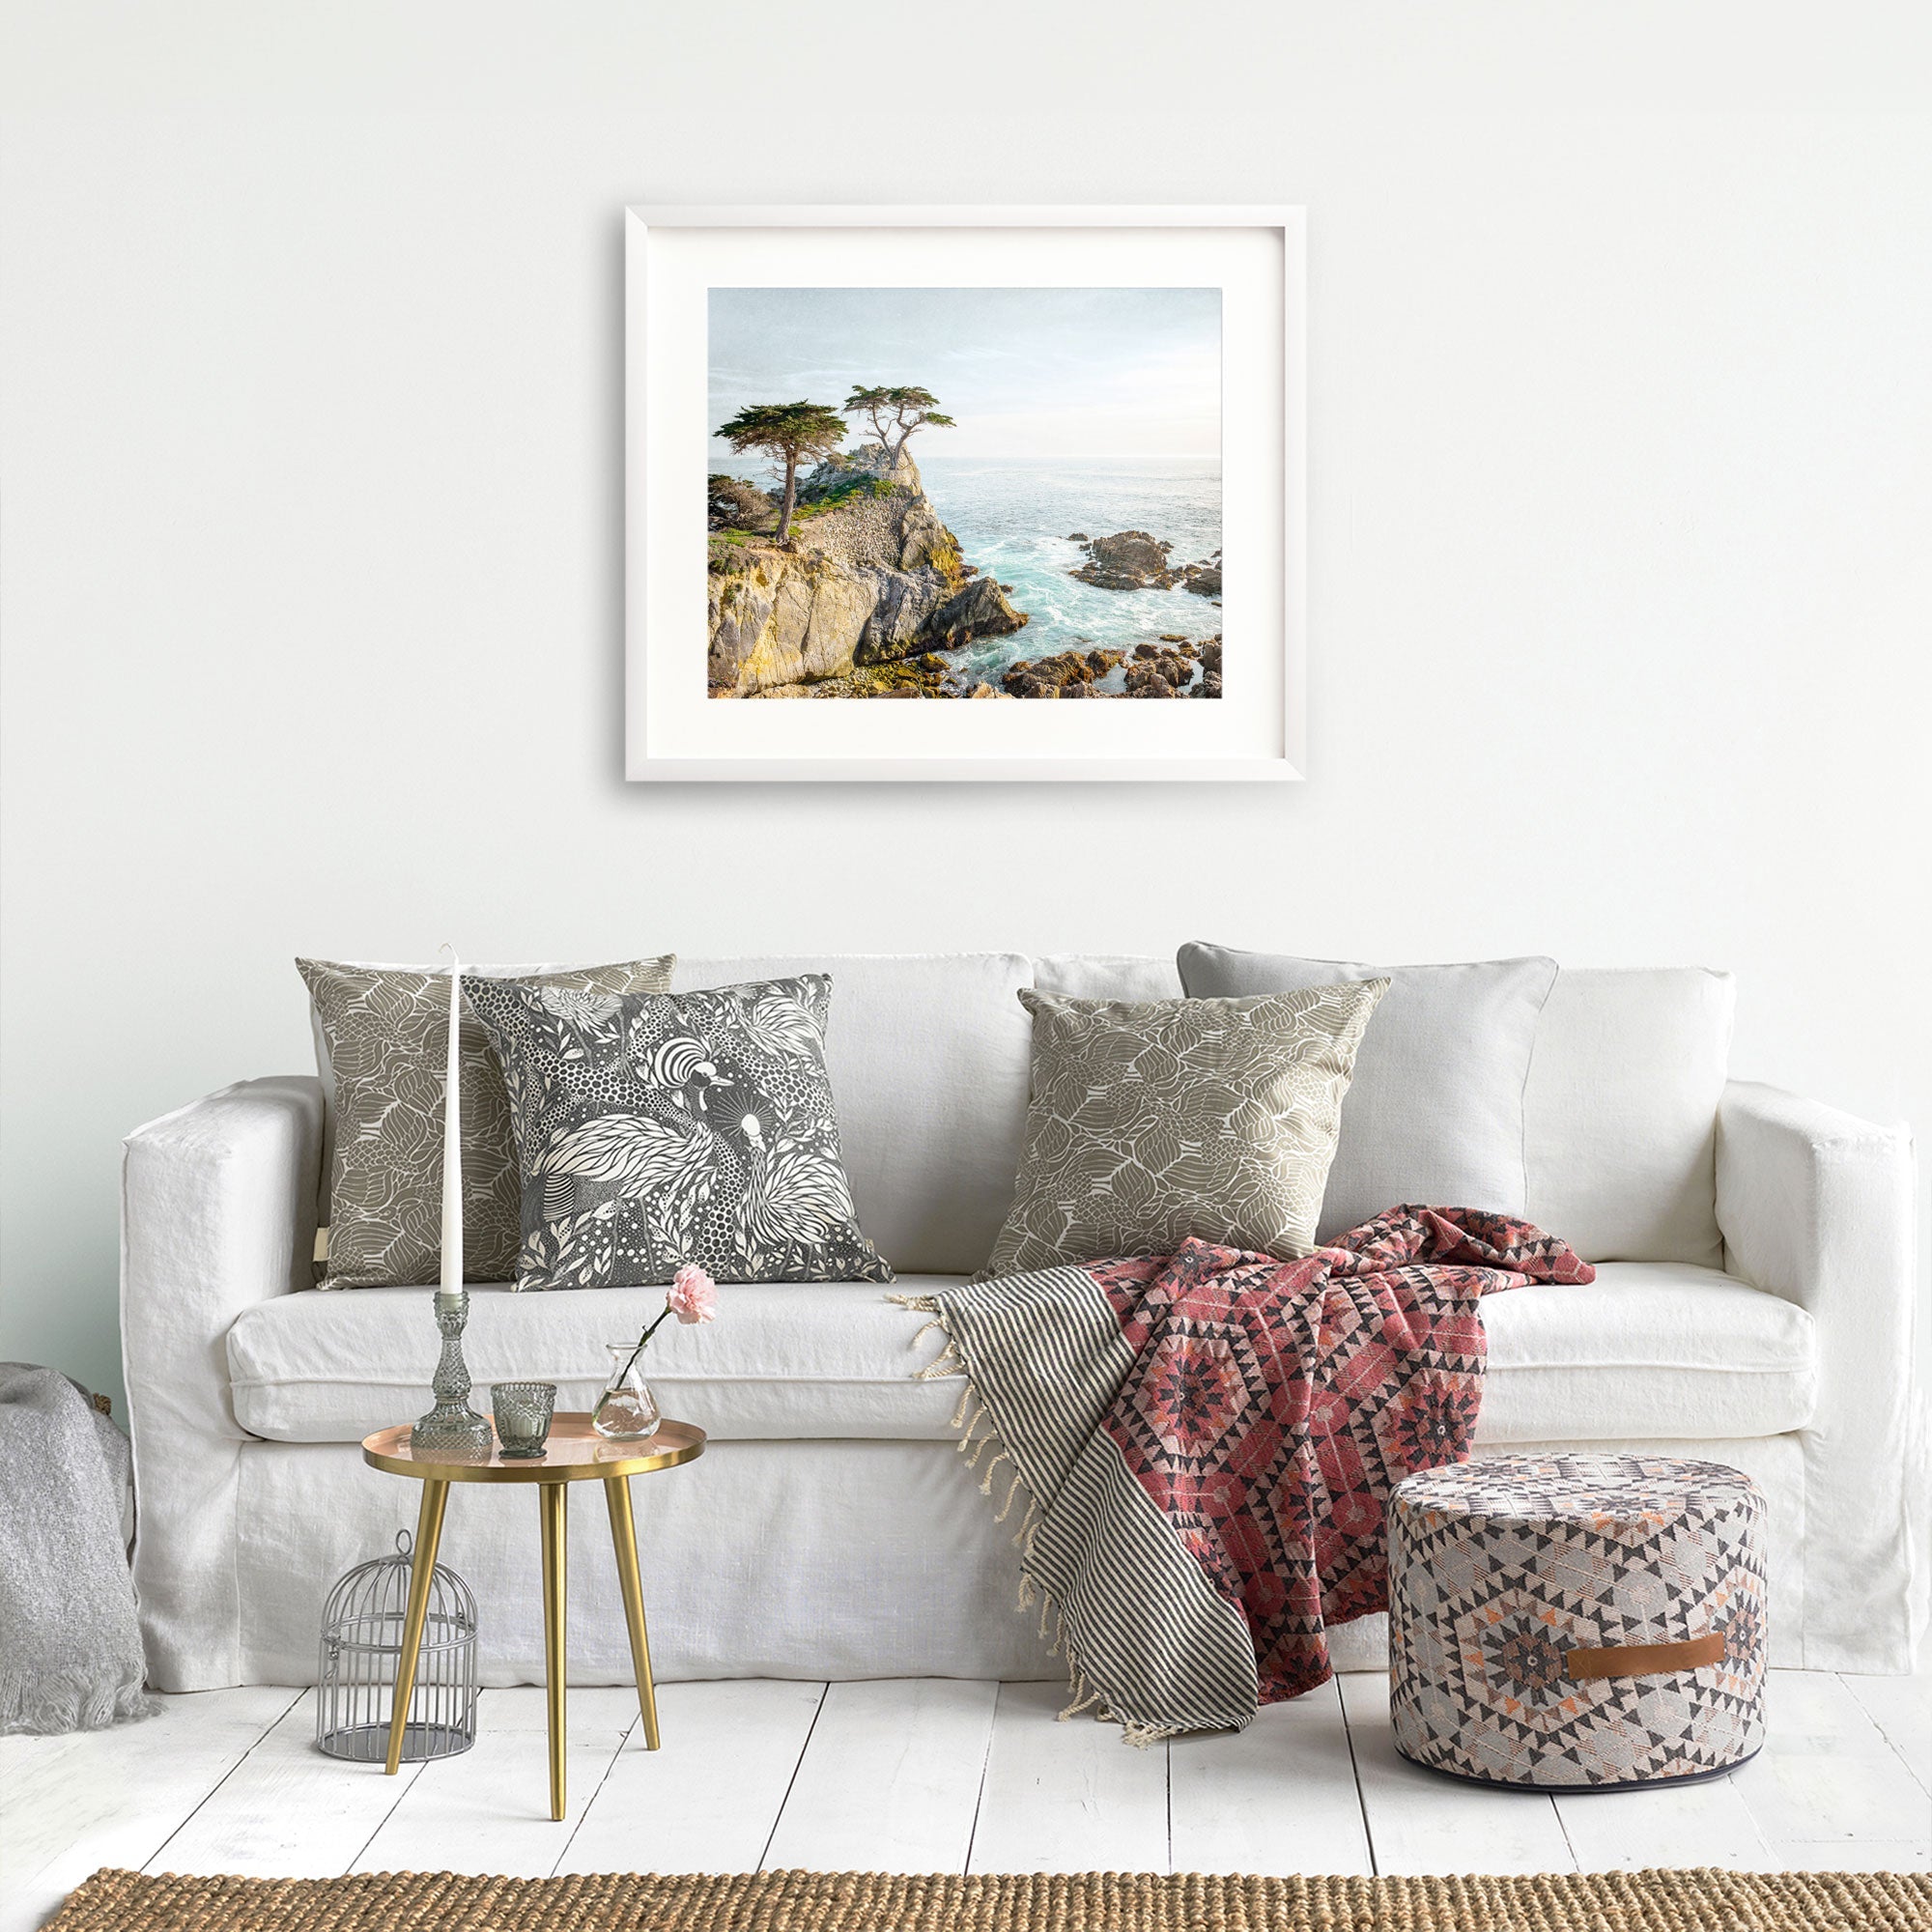 A cozy living room setup featuring a white sofa with decorative pillows, a red throw, a small round table with unframed prints and books, and an Offley Green California Coastal Print, 'Lone Cypress' painting on the wall.